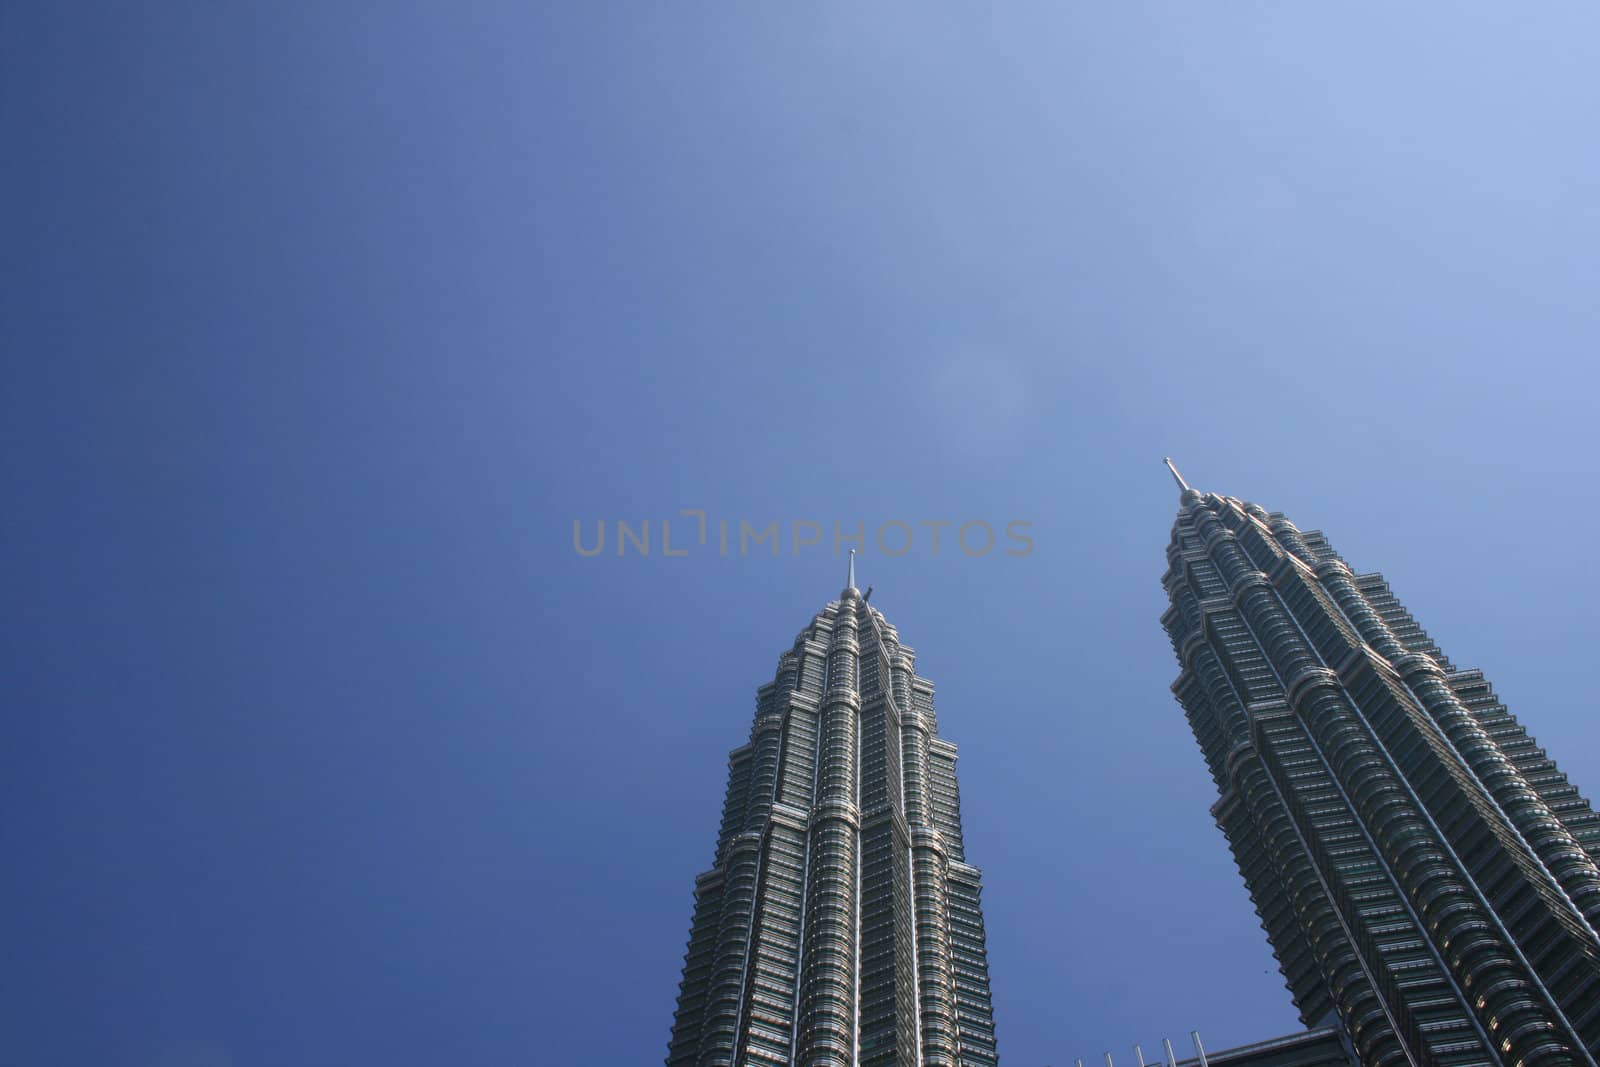 Twins towers in Malaysia at day time.